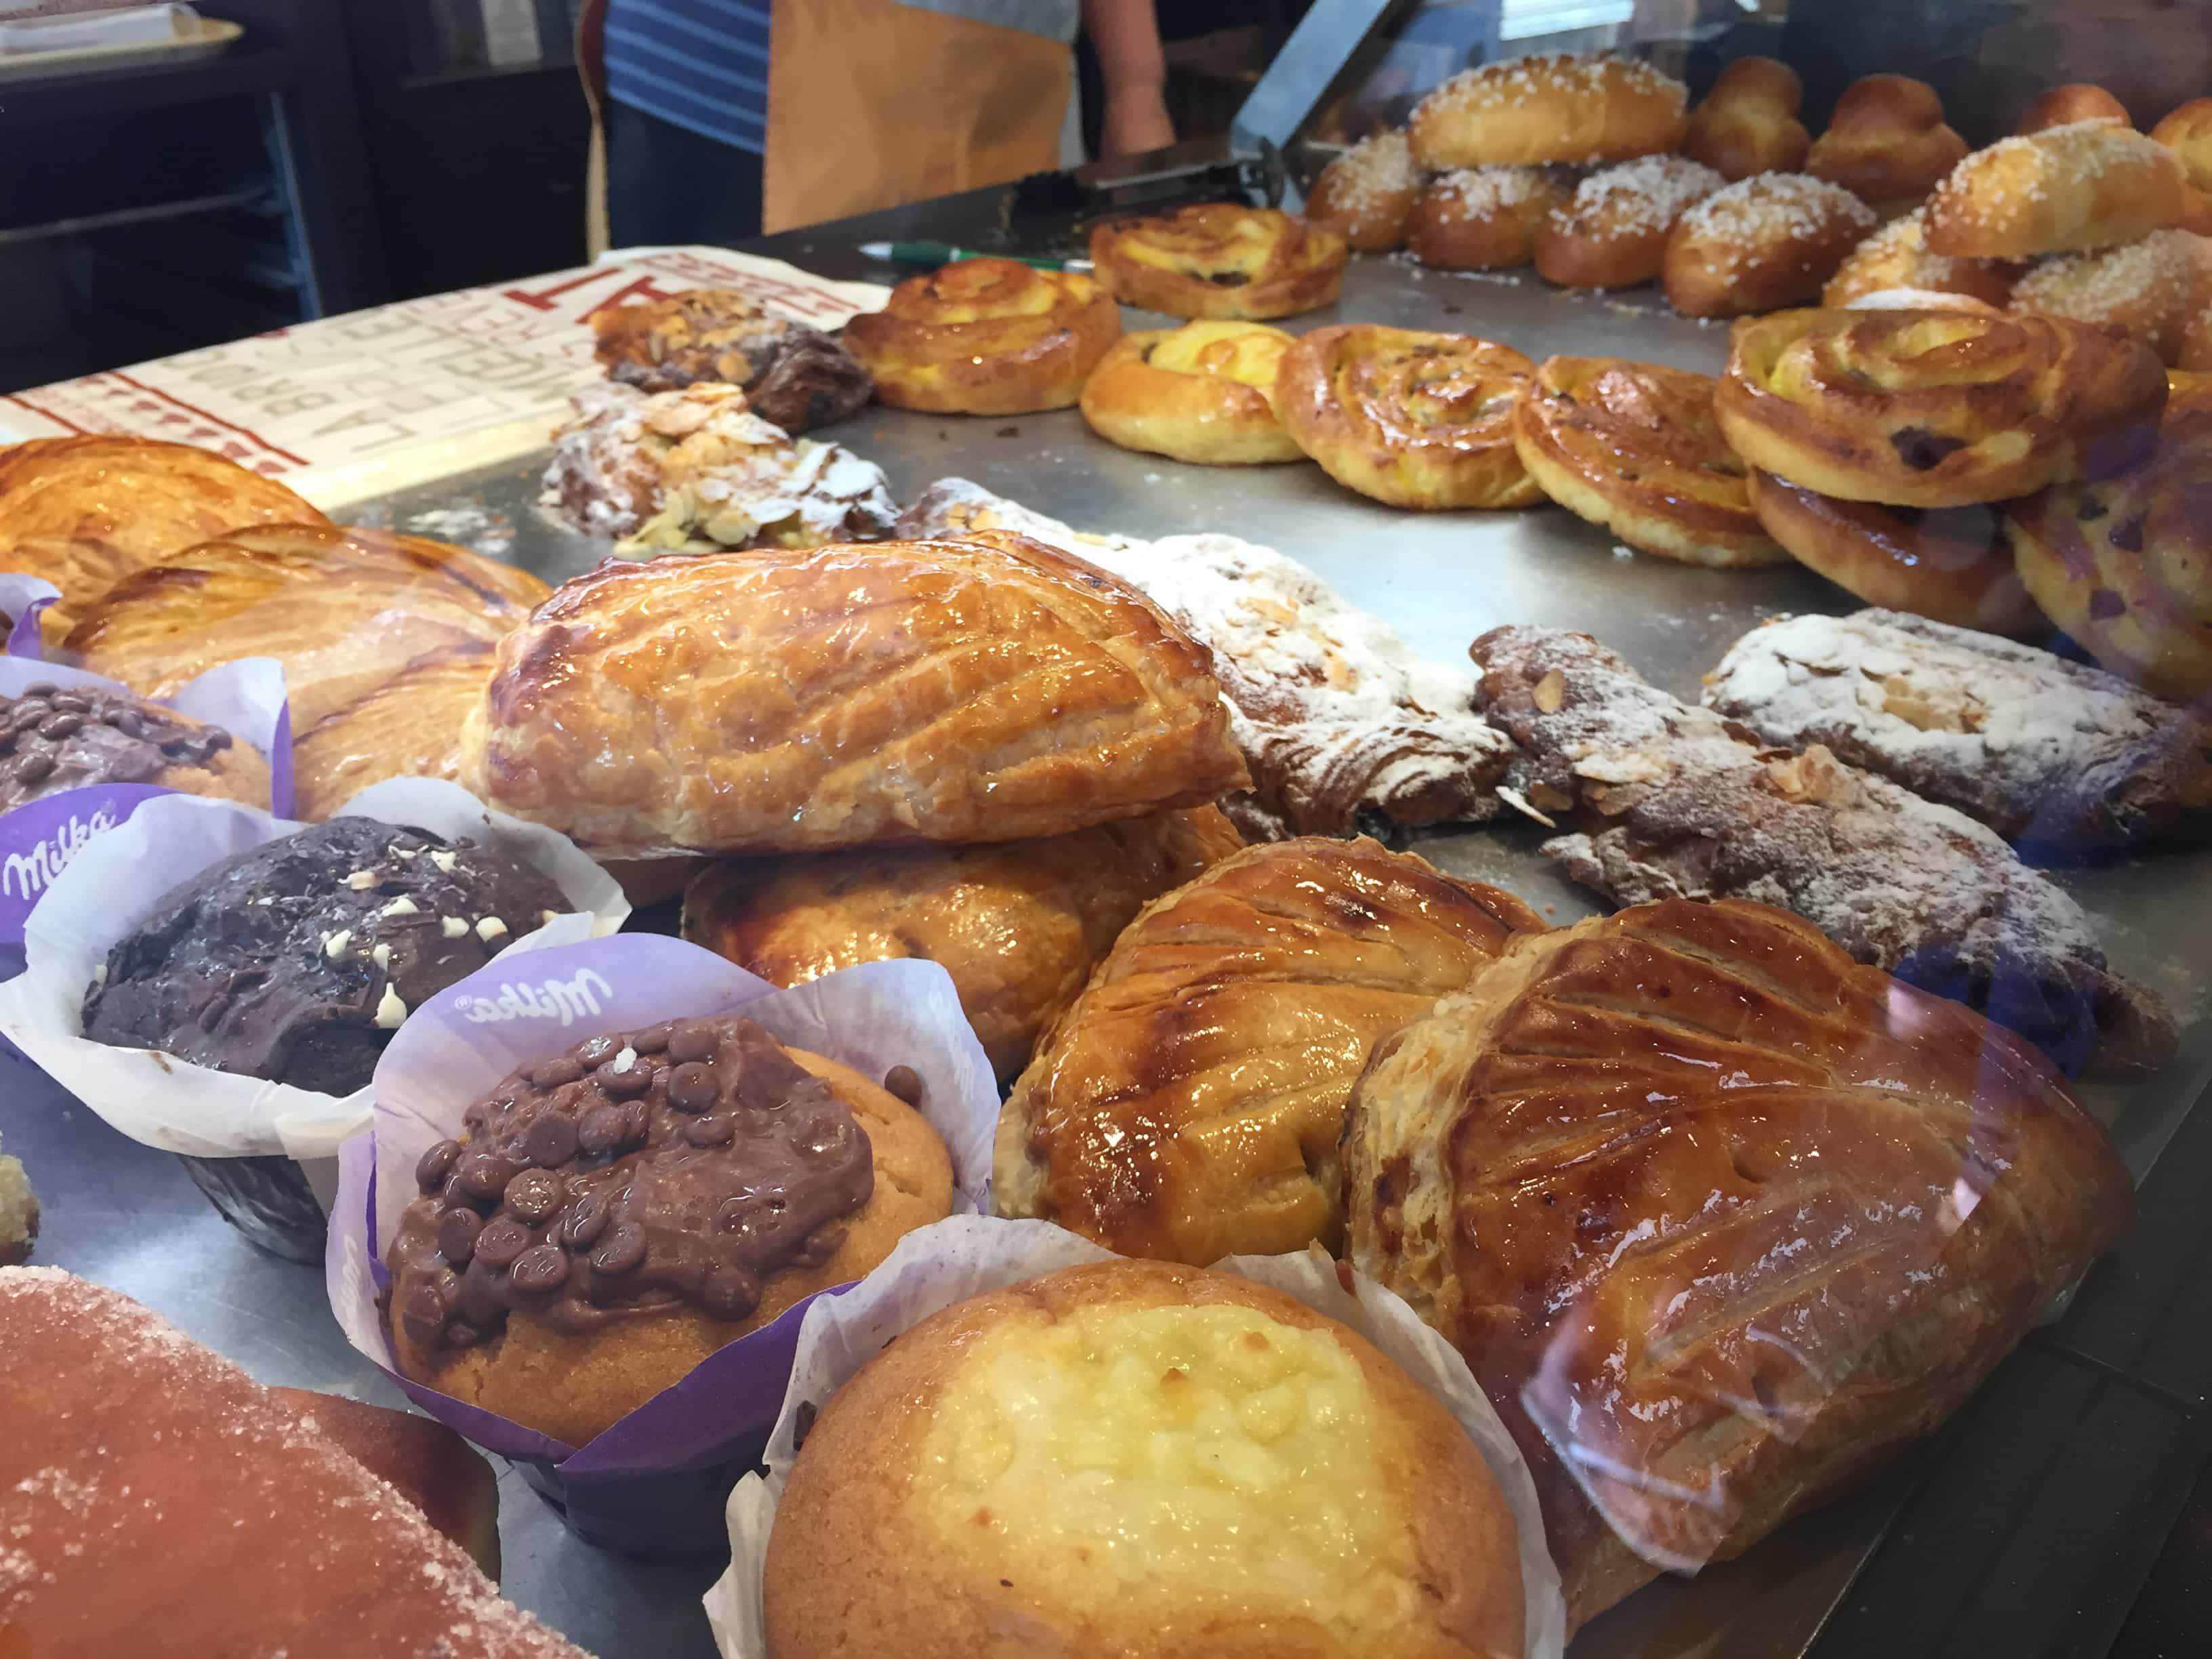 Delicious baked items at a boulangerie close to the studio